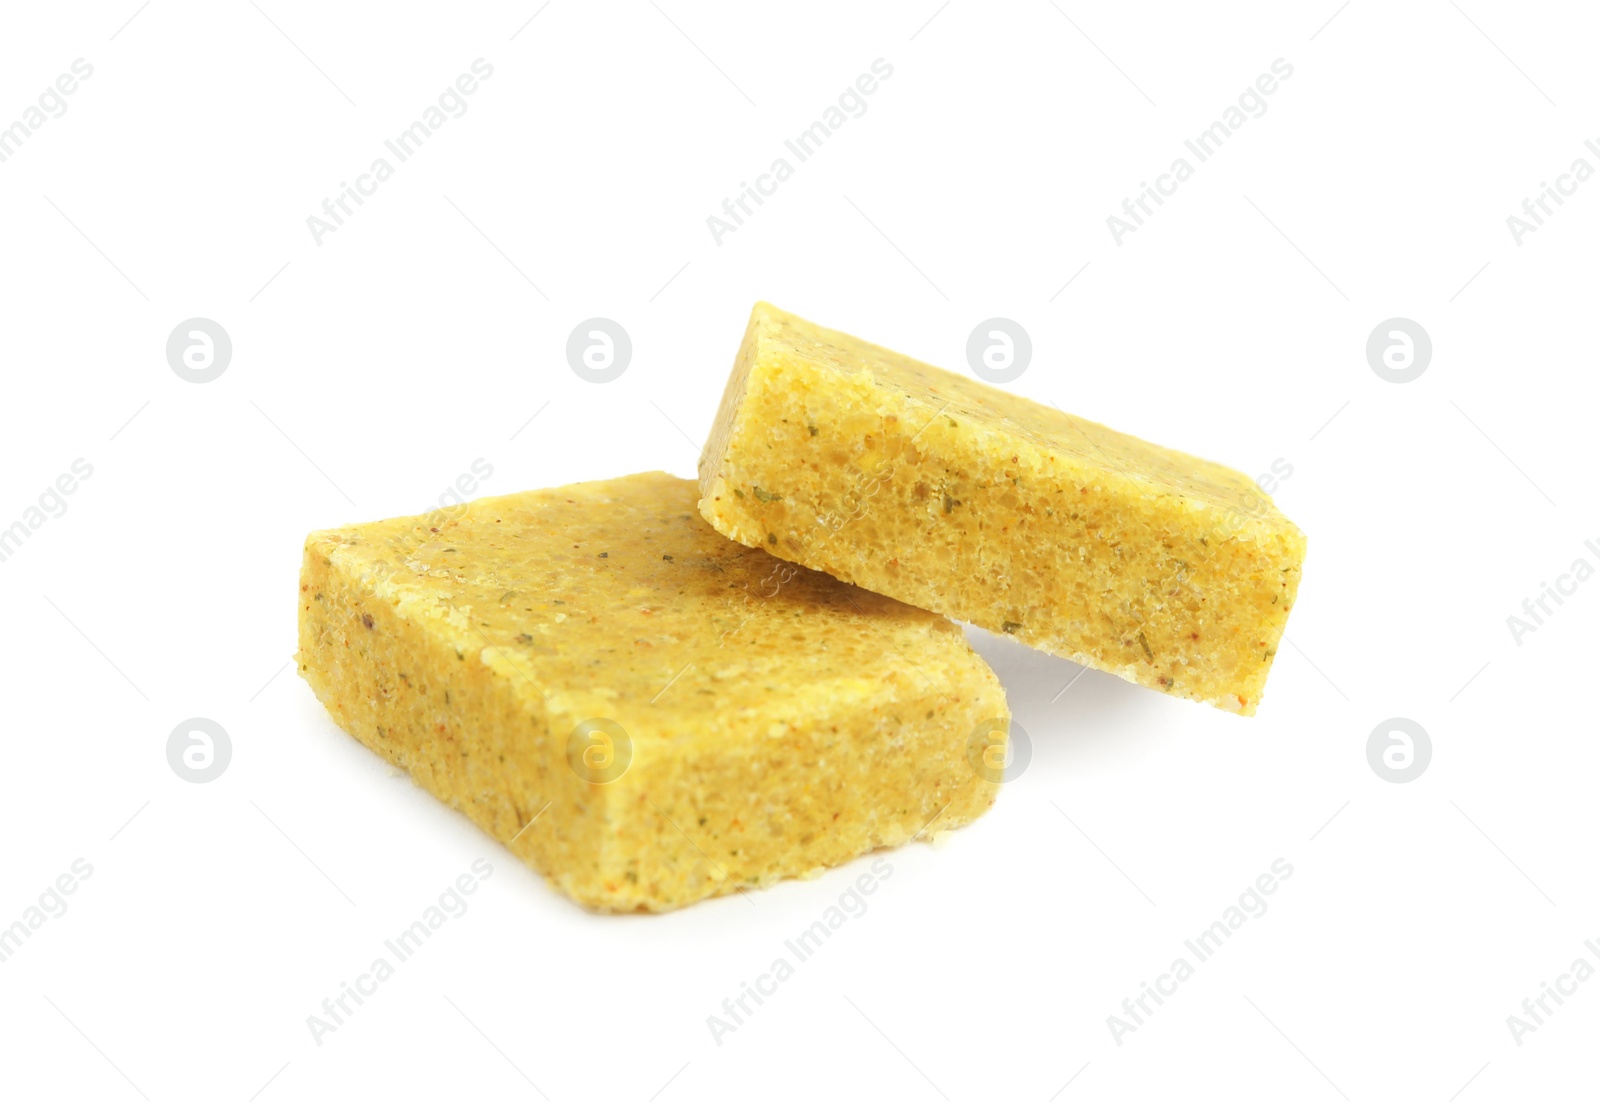 Photo of Bouillon cubes on white background. Broth concentrate